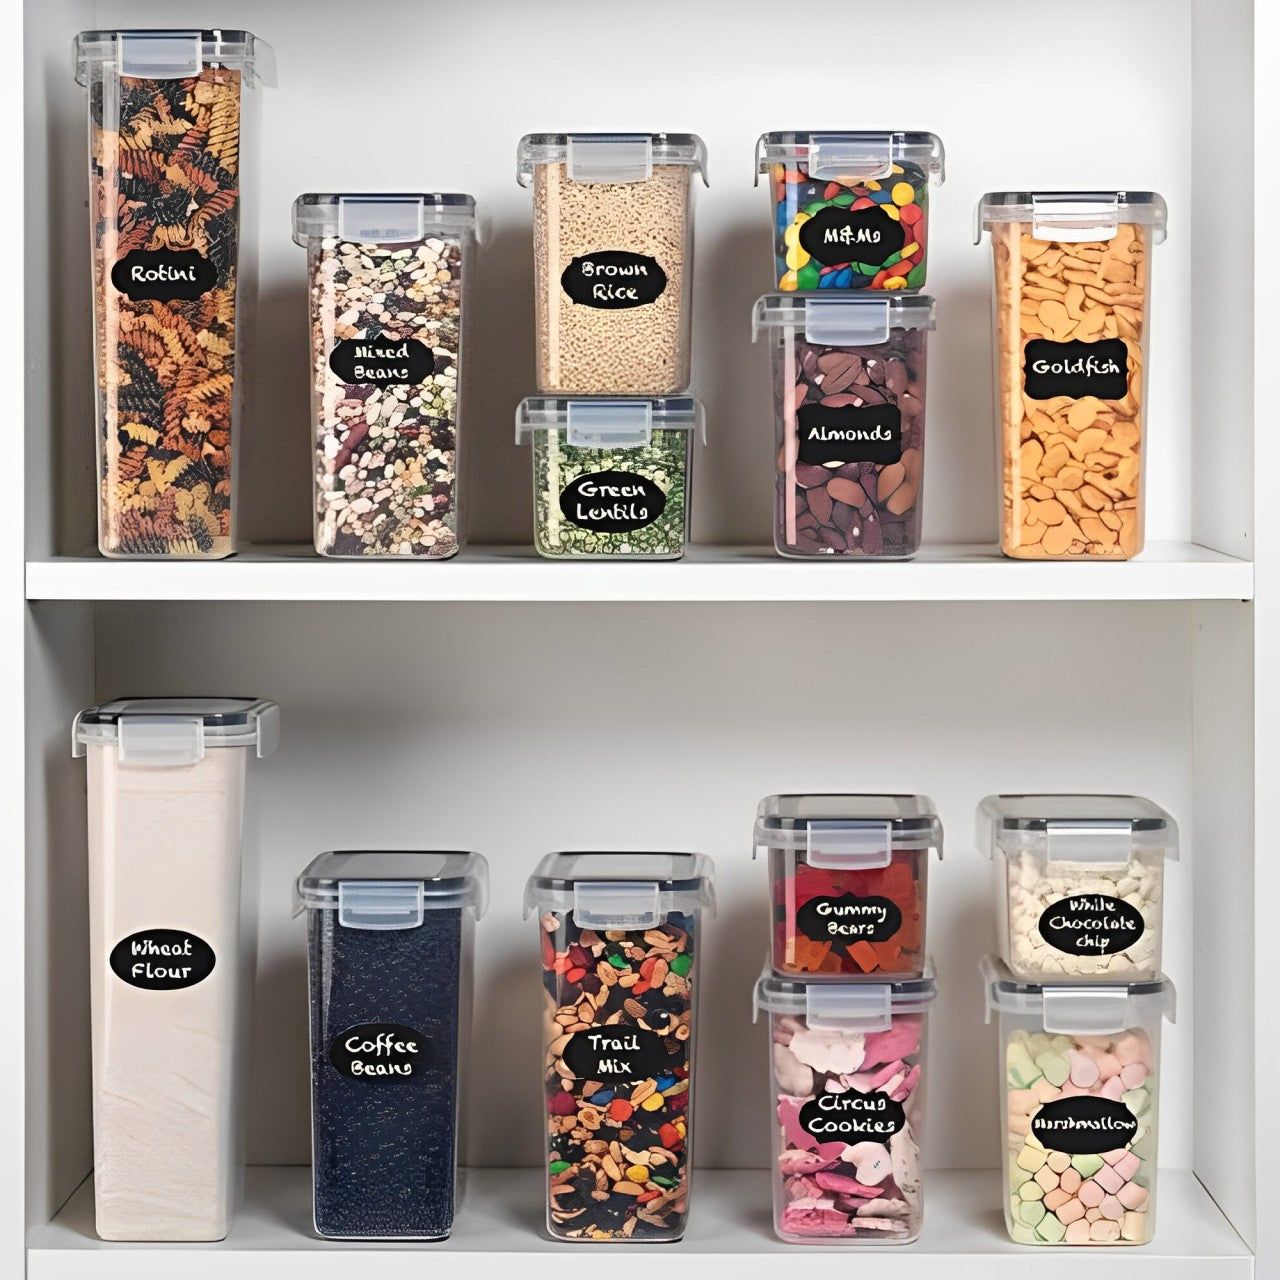 Airtight Food Storage Container well organized